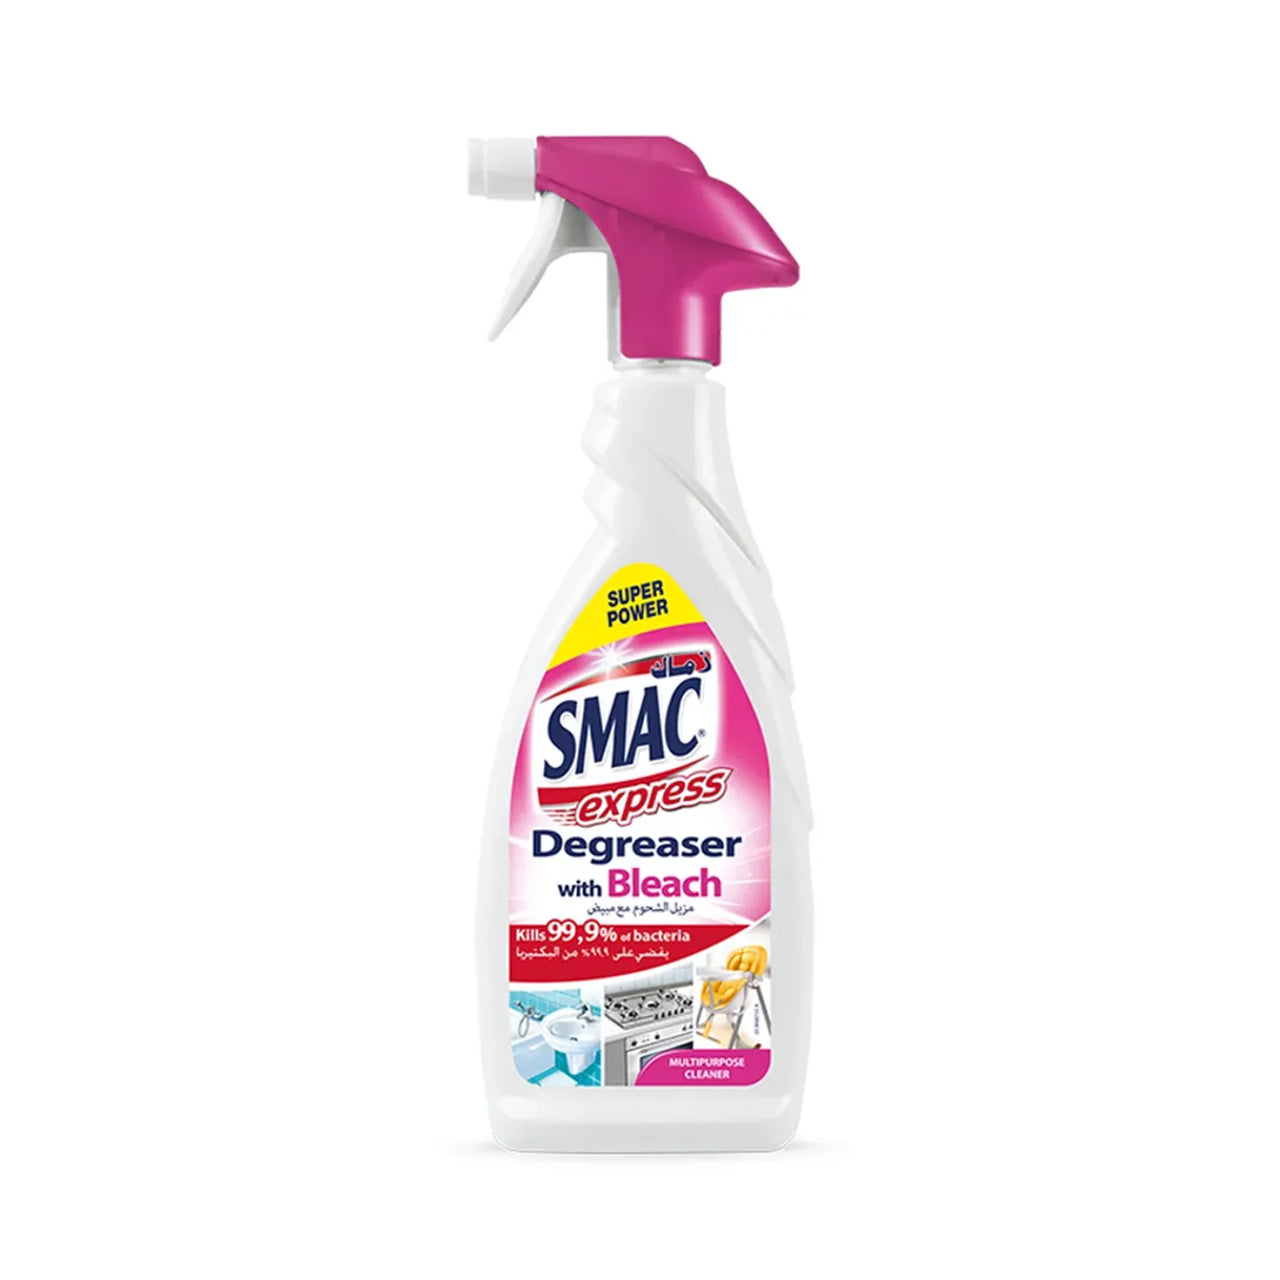 SMAC-Express Degreaser With Bleach-650ml